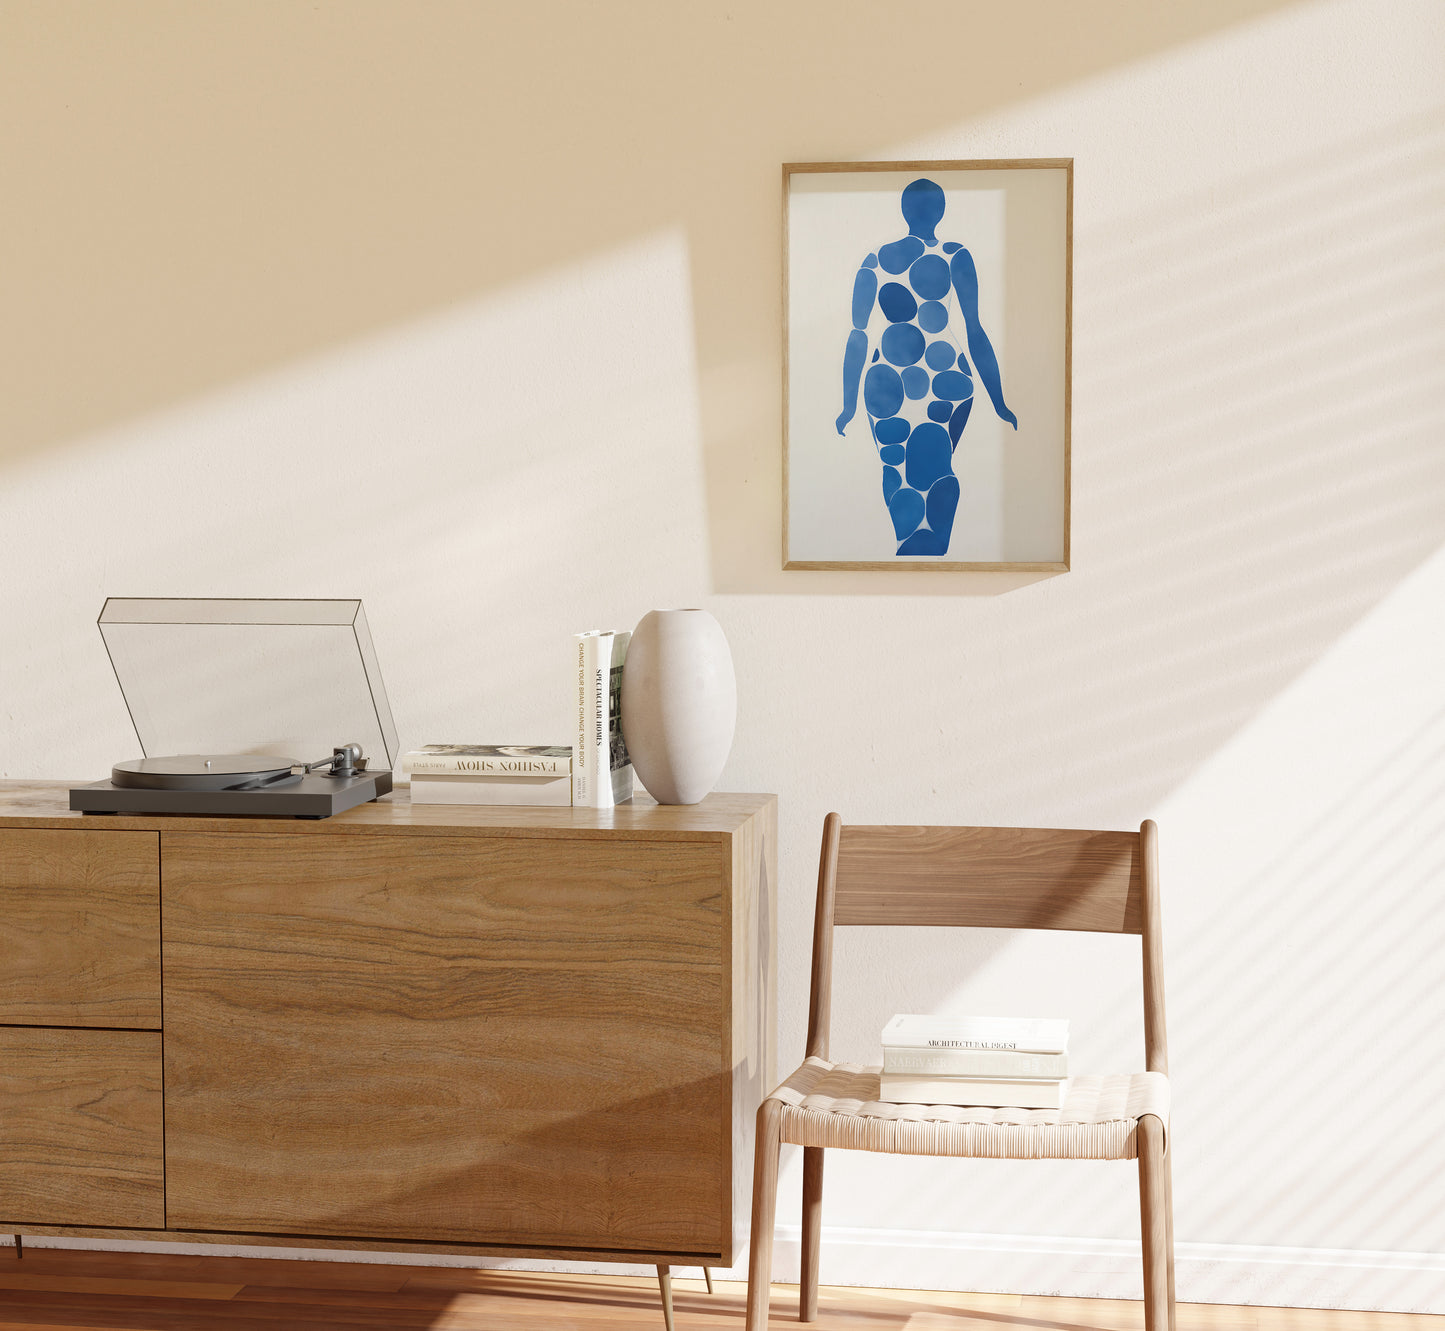 A modern room with a sideboard, chair, record player, and abstract art on the wall.